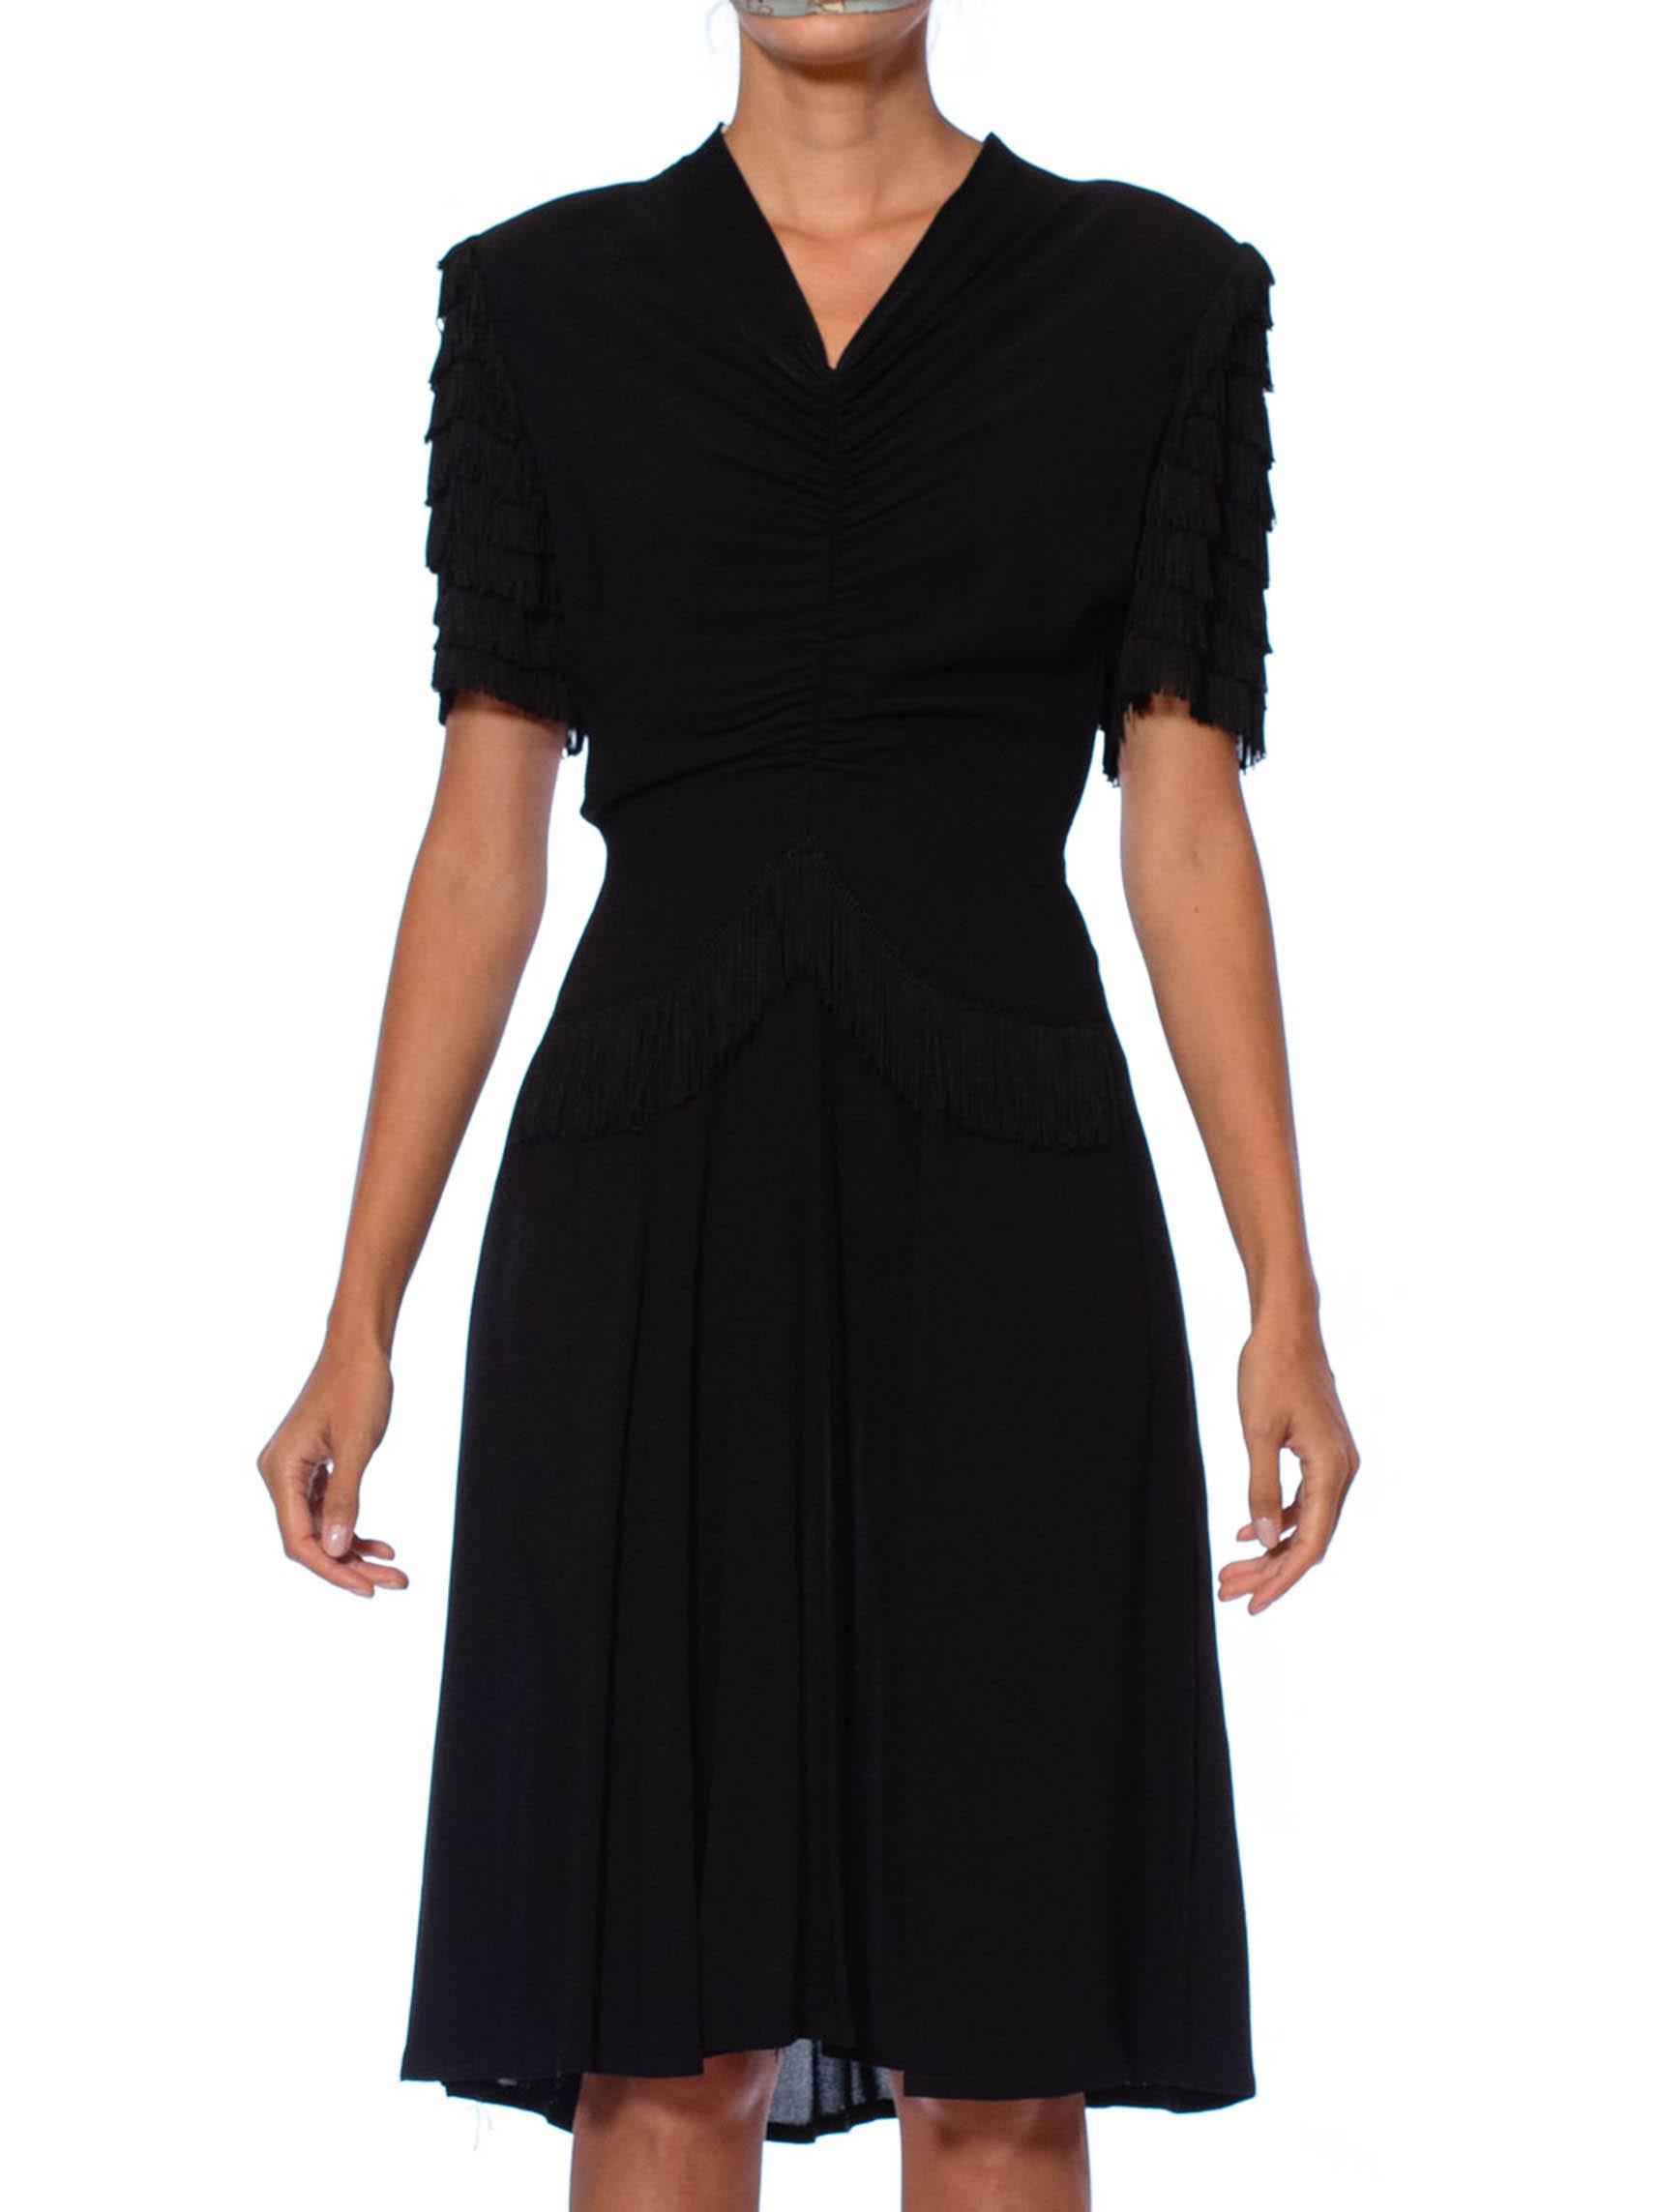 1940S Black Rayon Crepe Shirred Front Dress With Fringe Sleeves In Excellent Condition For Sale In New York, NY